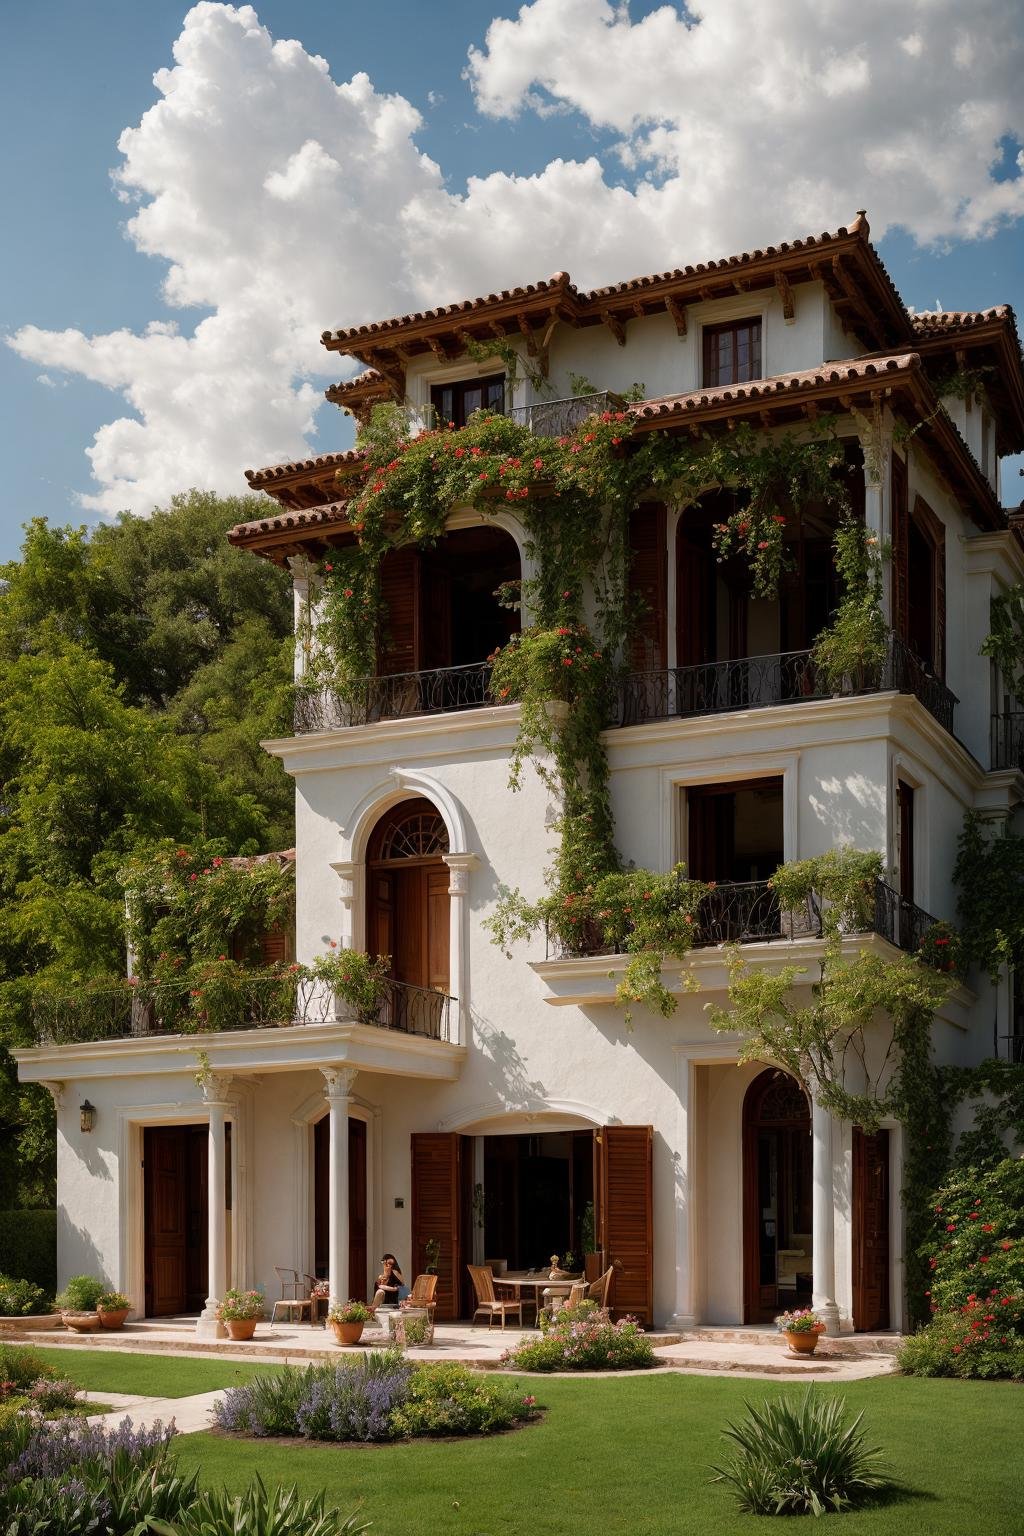 A luxurious and intricately detailed three-story neo-classical villa exterior scene, showcasing opulence. The art form chosen for this depiction is photography, captured with a 50mm lens. The esteemed photographer Ansel Adams serves as the source of inspiration. The villa stands amidst lush gardens, its ornate architecture emphasized by the play of shadows and sunlight. The color temperature is warm, enhancing the golden accents of the villa's design. The atmosphere exudes elegance, while the subjects exhibit serene expressions. Soft, natural lighting envelops the scene, creating a timeless ambiance